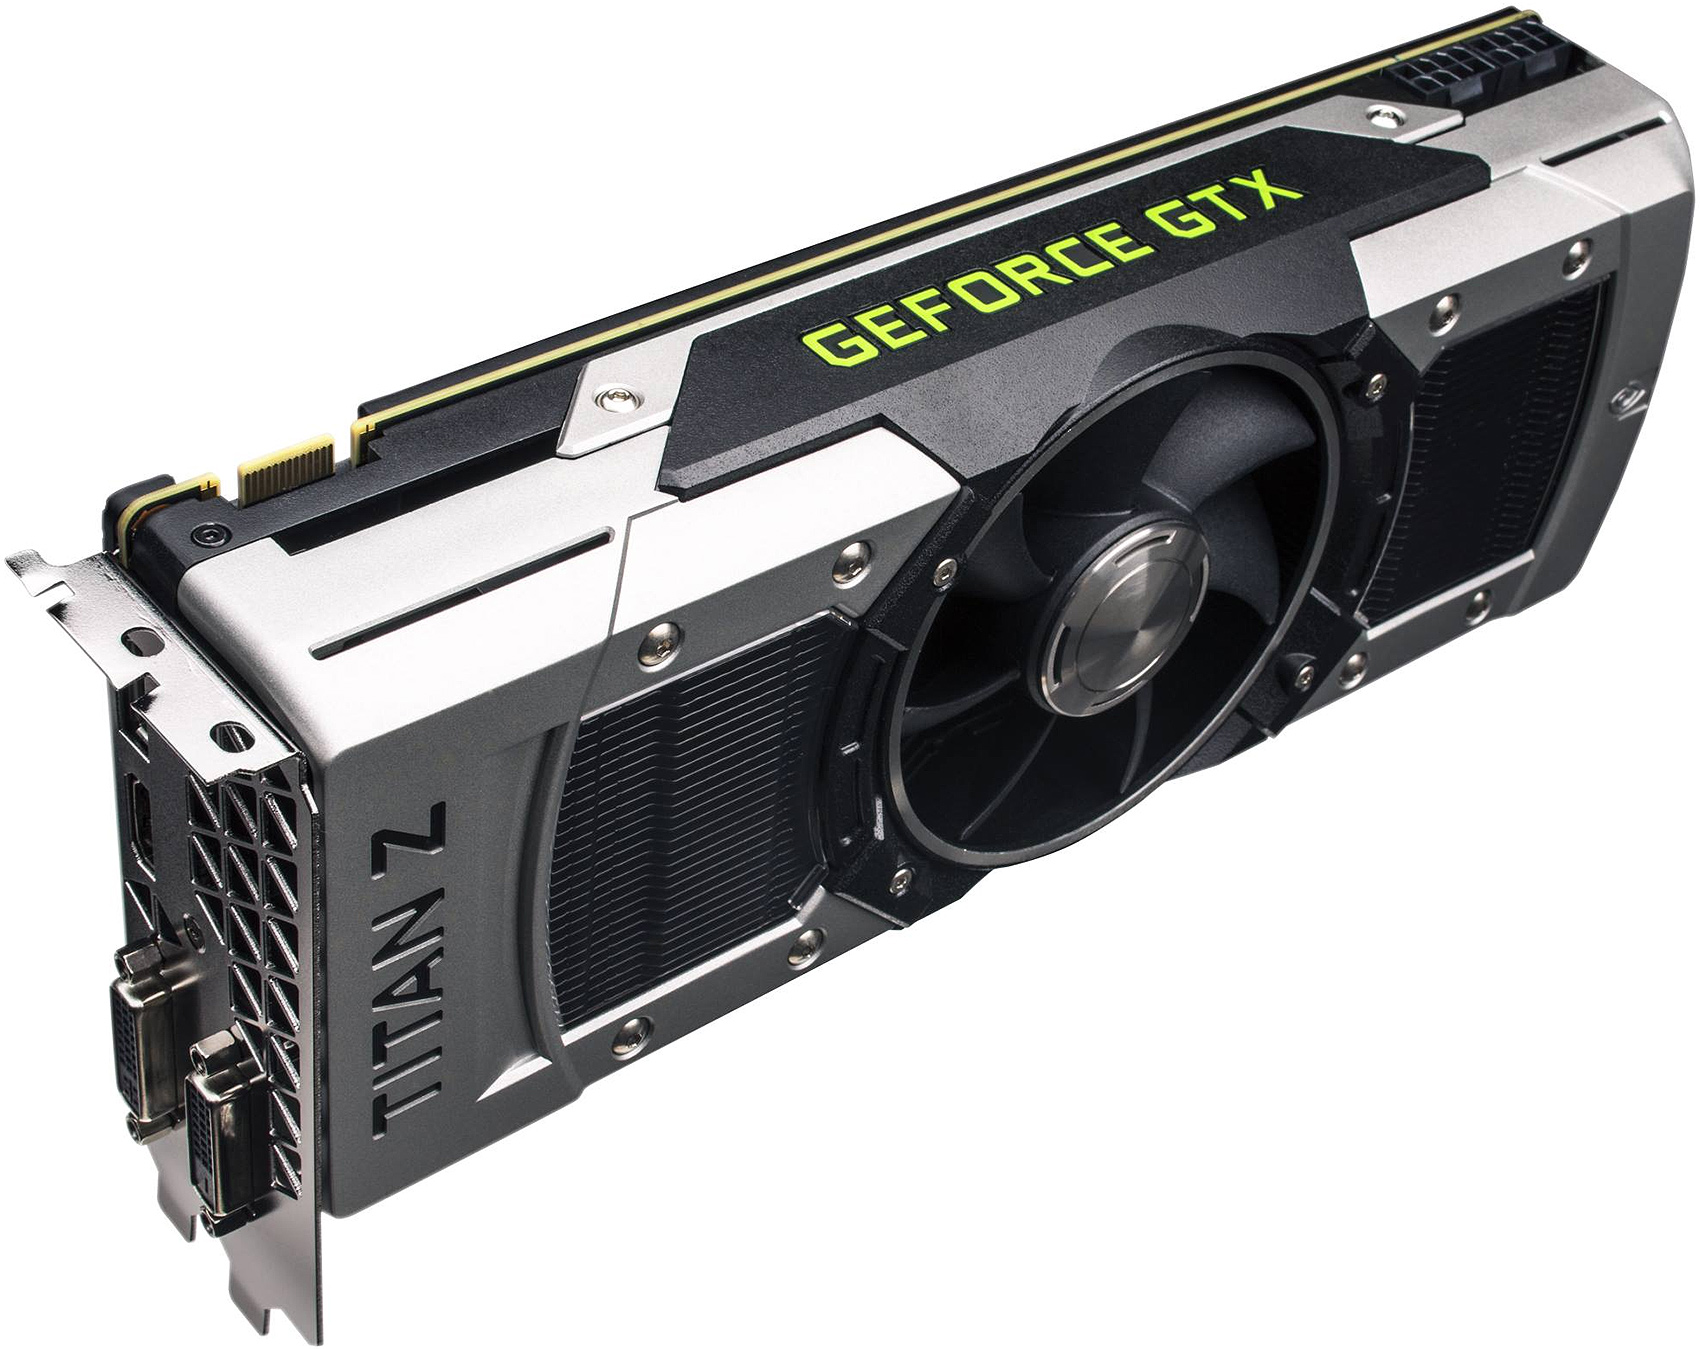 GeForce GTX Titan Z for PC makers 